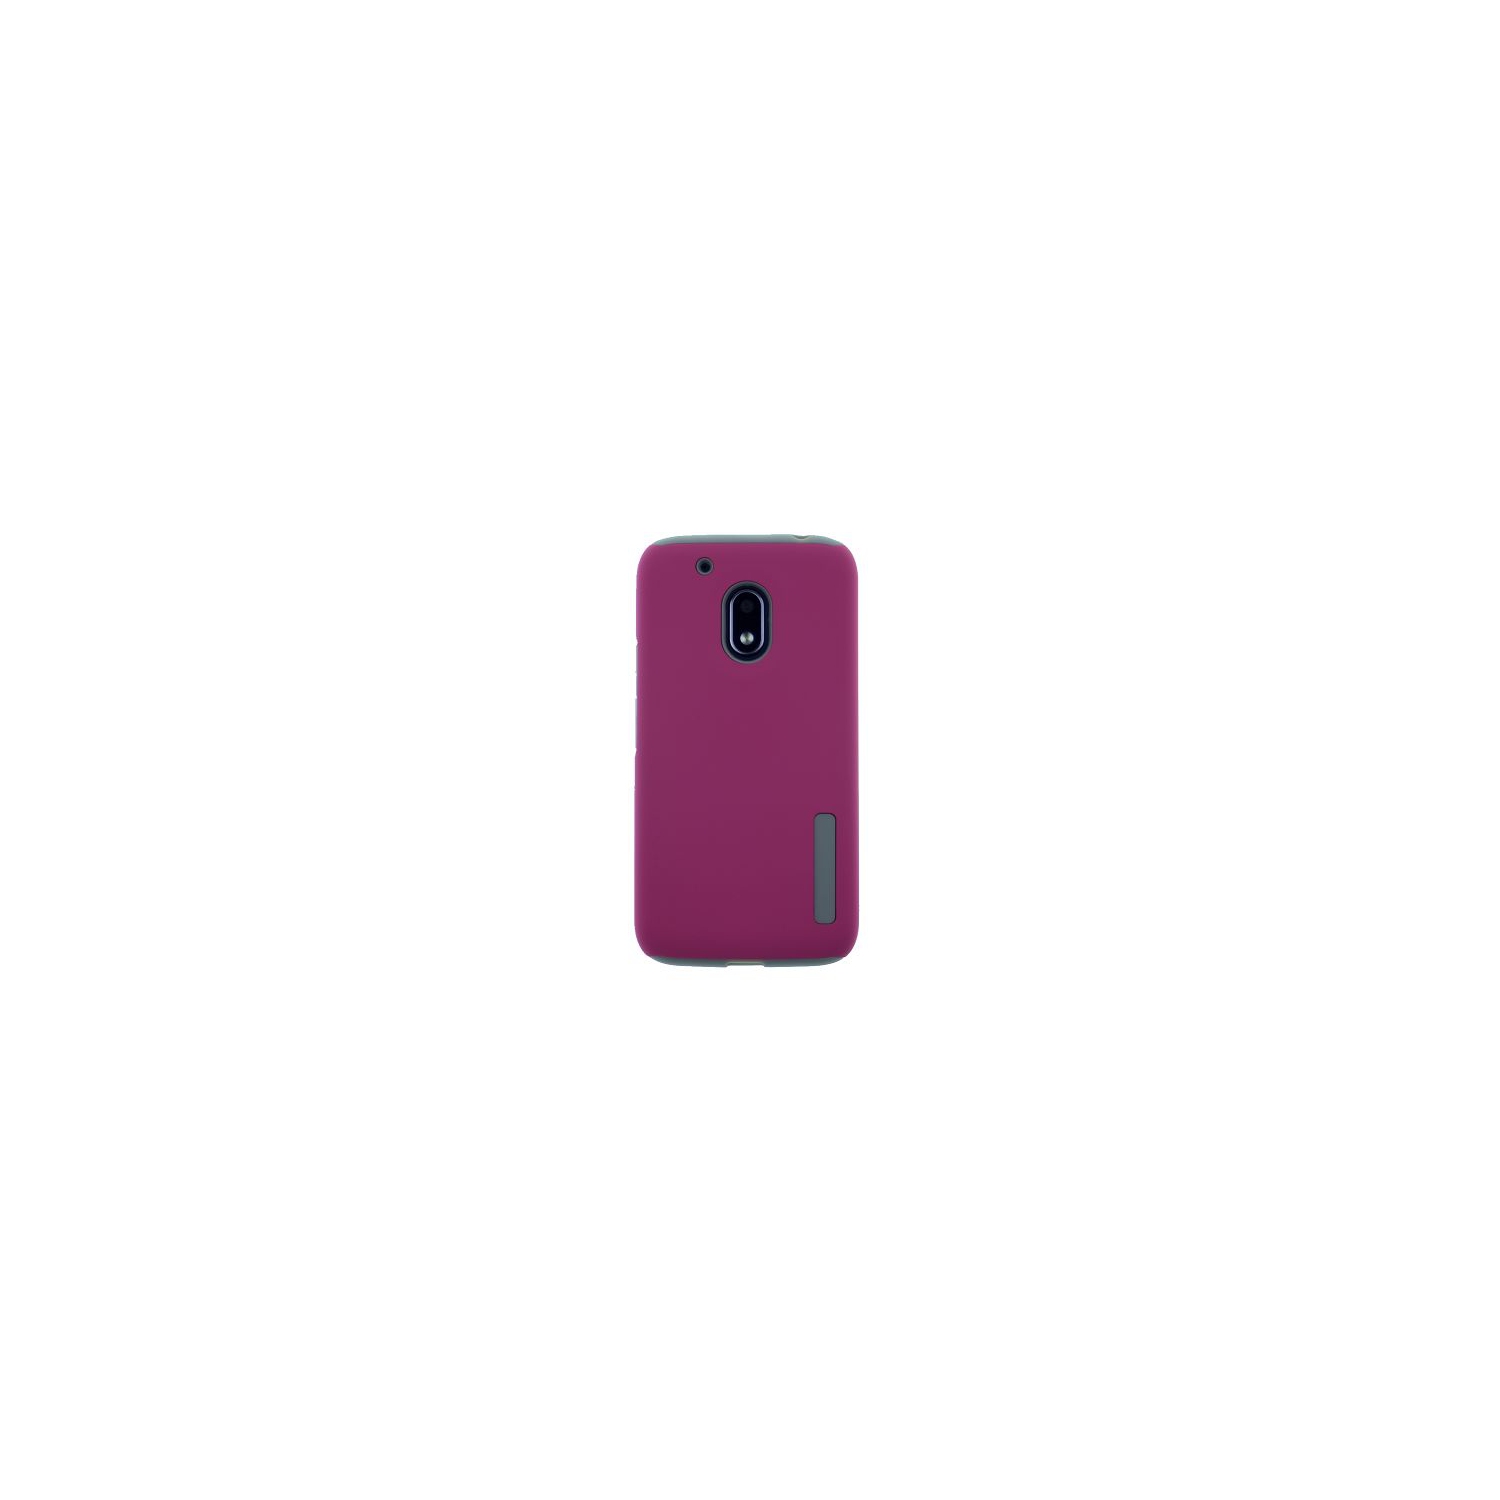 Moto G4 Play Double Layers Hard Case,w/ Smooth Back, Pink